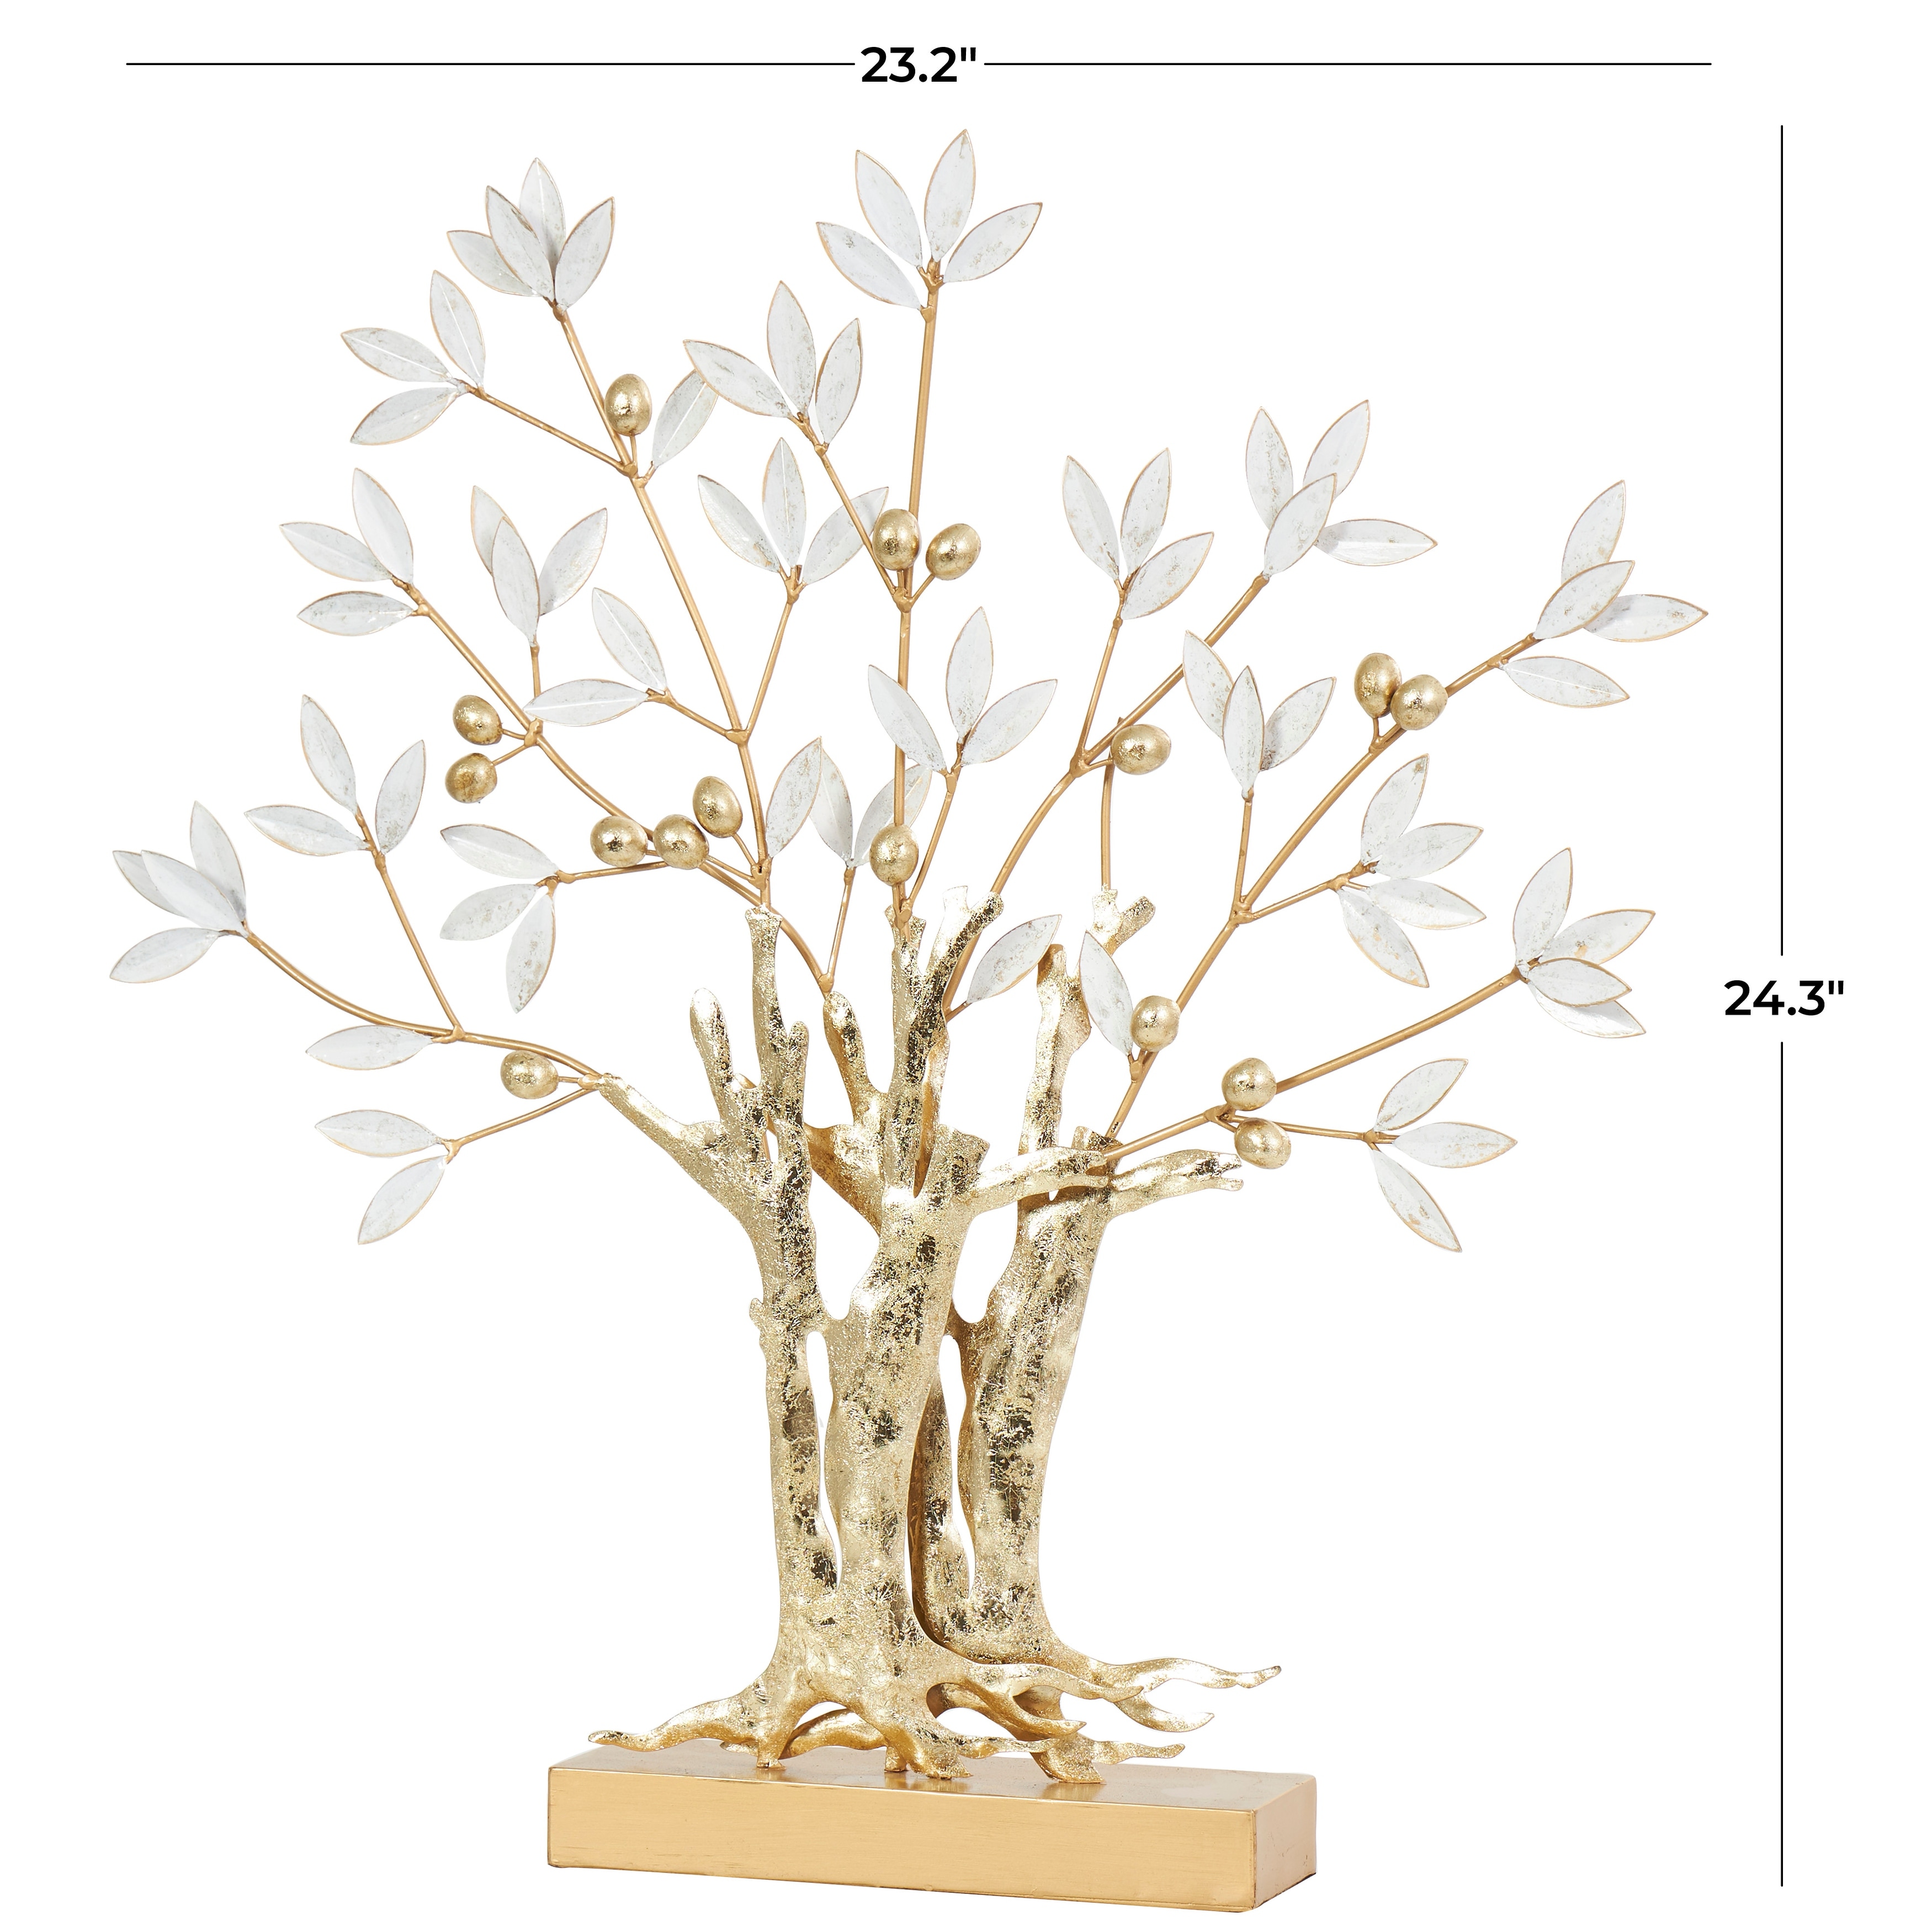 Gold Metal Metallic Tree Sculpture with White Leaves